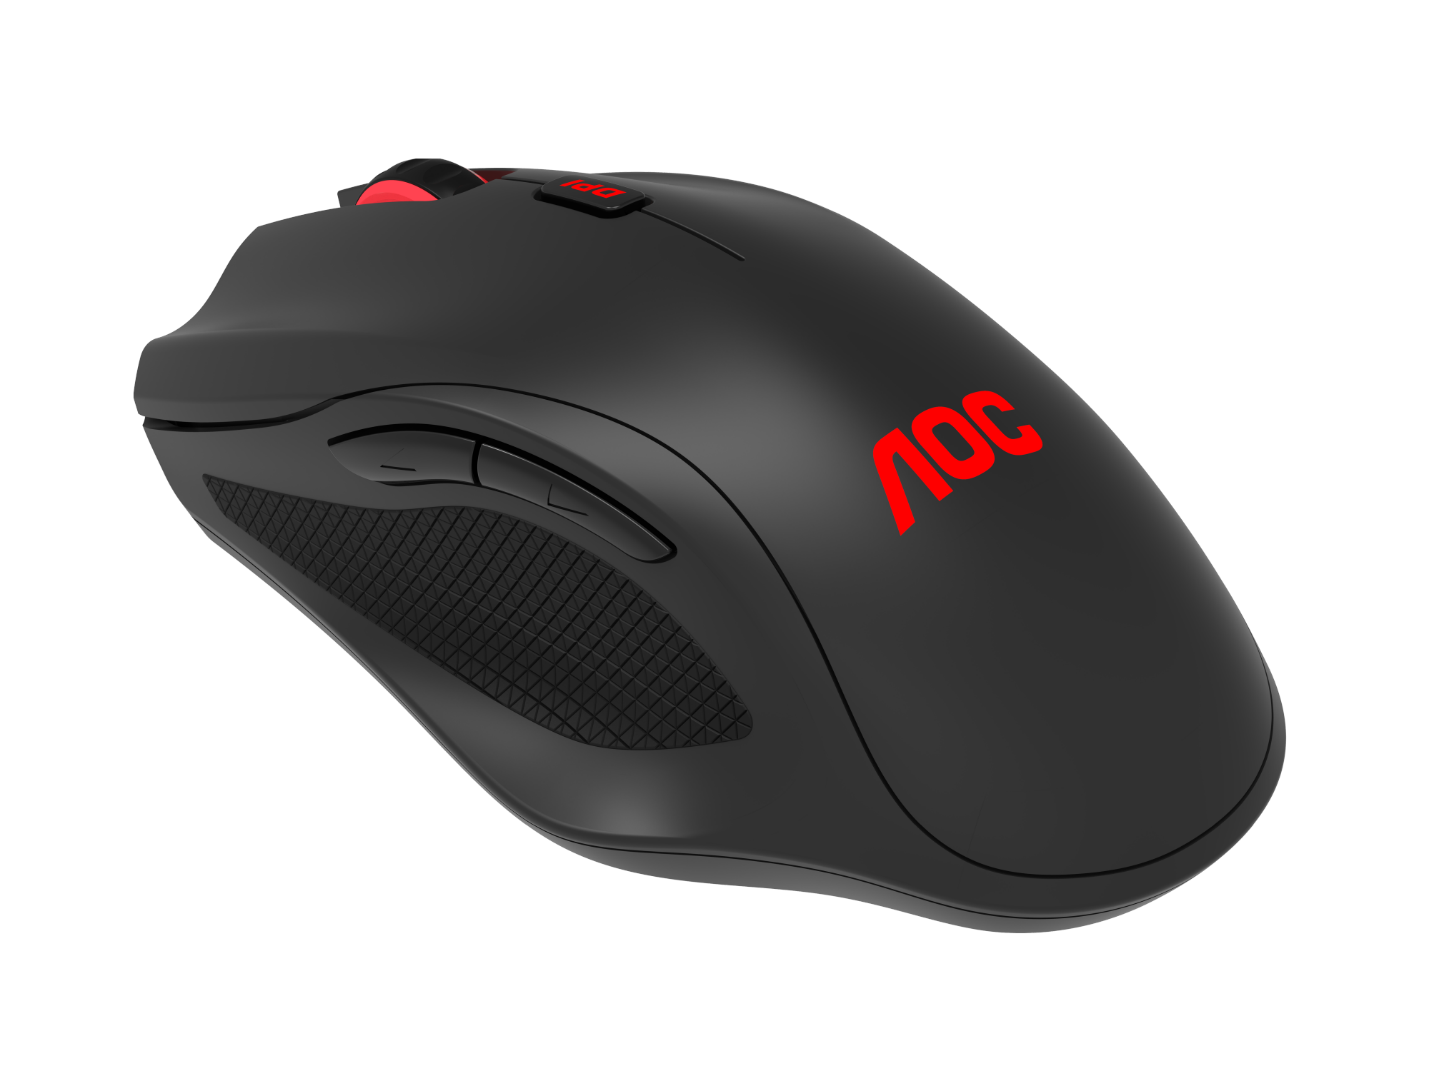 AOC launches GM200 and GK200 gaming keyboard and mouse products in Vietnam - Photo 1.